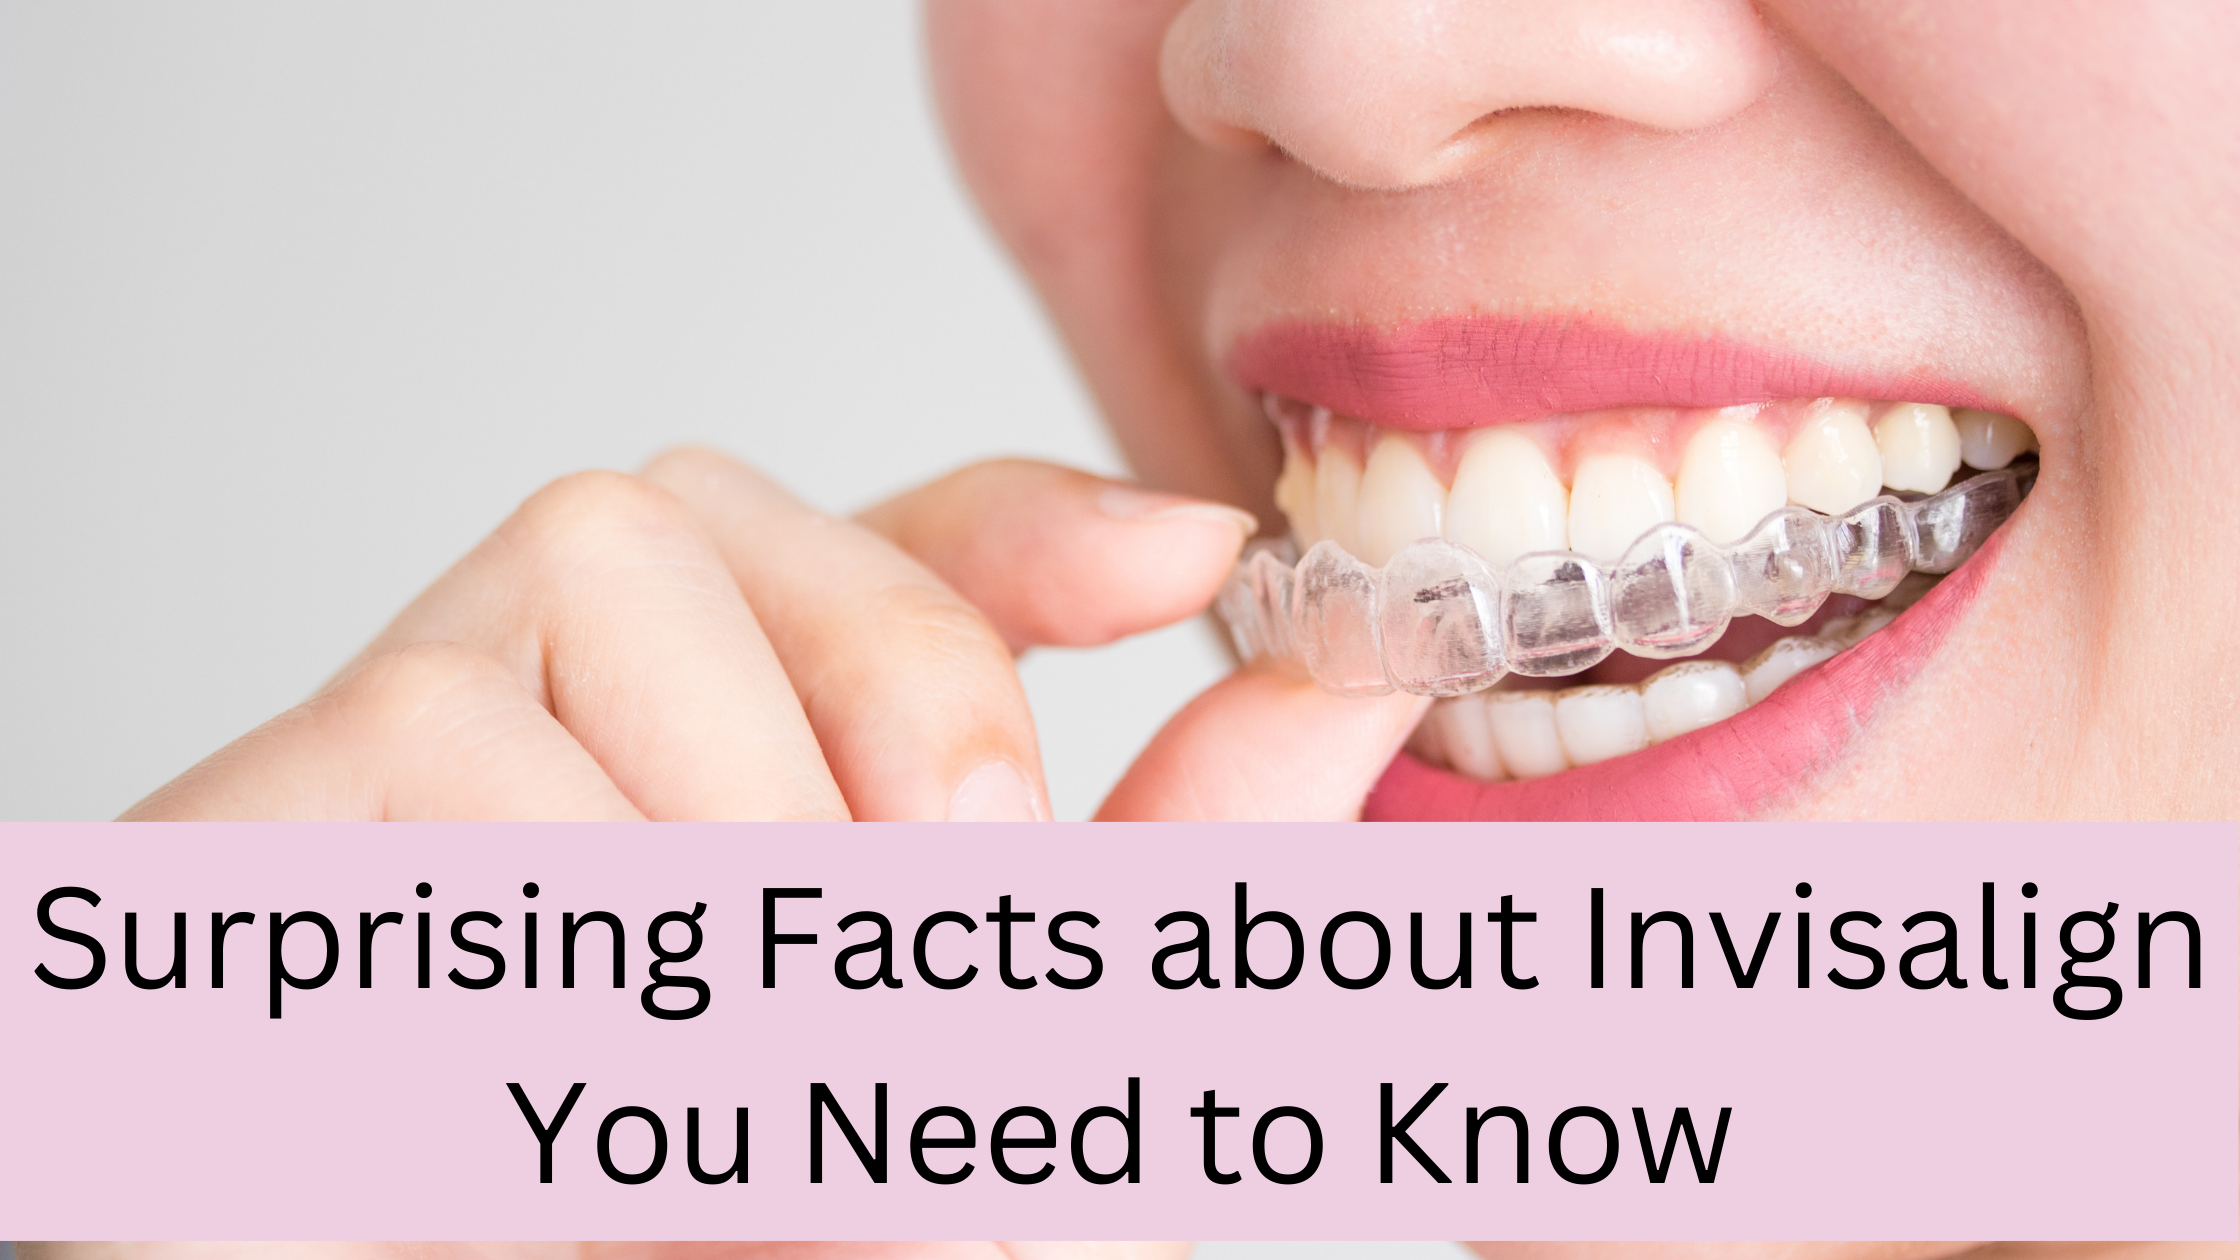 https://www.smilecraftdental.com/wp-content/uploads/2023/03/Surprising-Facts-about-Invisalign-You-Need-to-Know.png